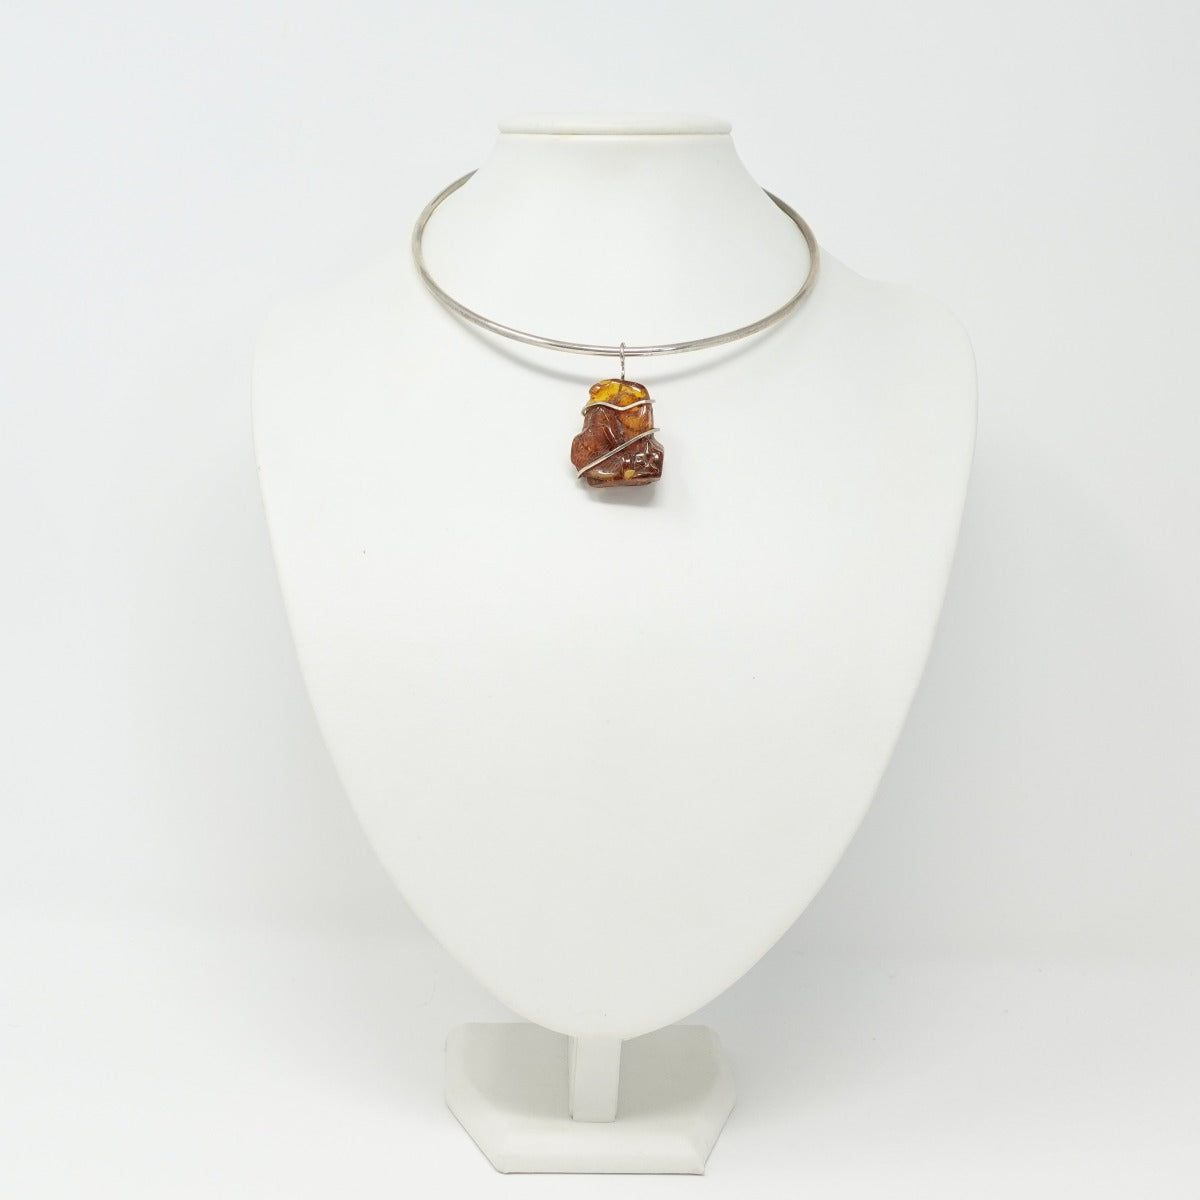 Jonathan Rout - Silver choker necklace with red burnt umber stone